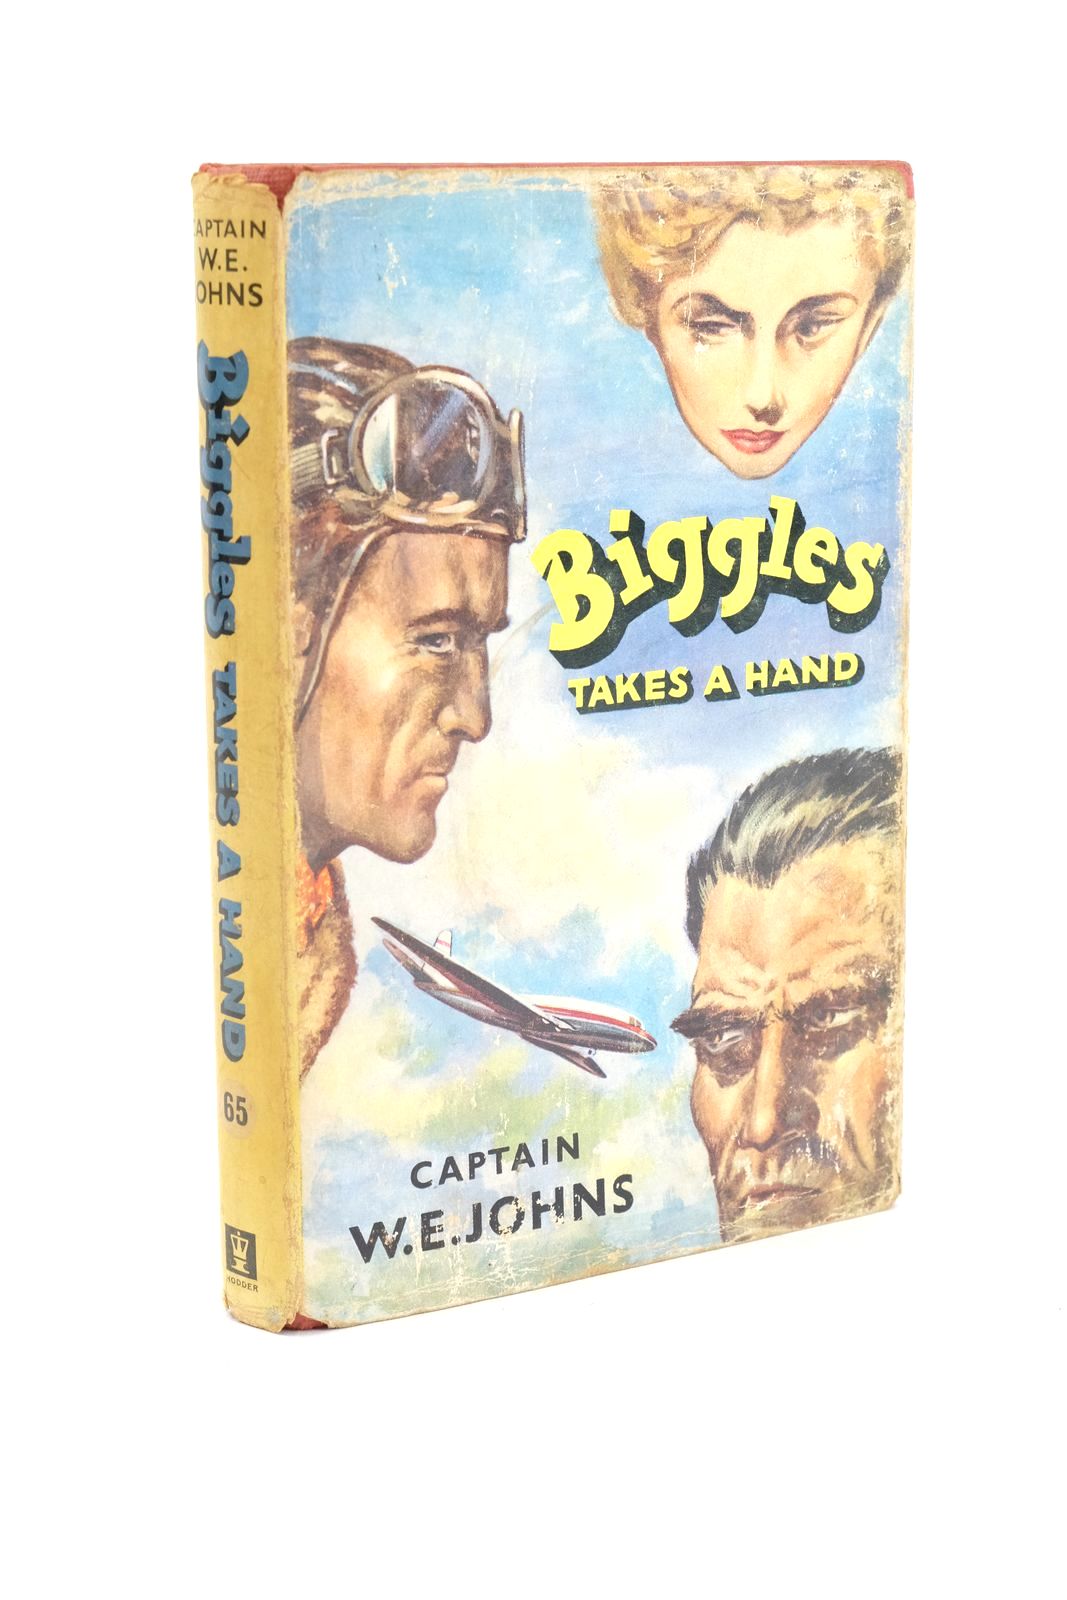 Photo of BIGGLES TAKES A HAND written by Johns, W.E. illustrated by Stead,  published by Hodder & Stoughton (STOCK CODE: 1323927)  for sale by Stella & Rose's Books